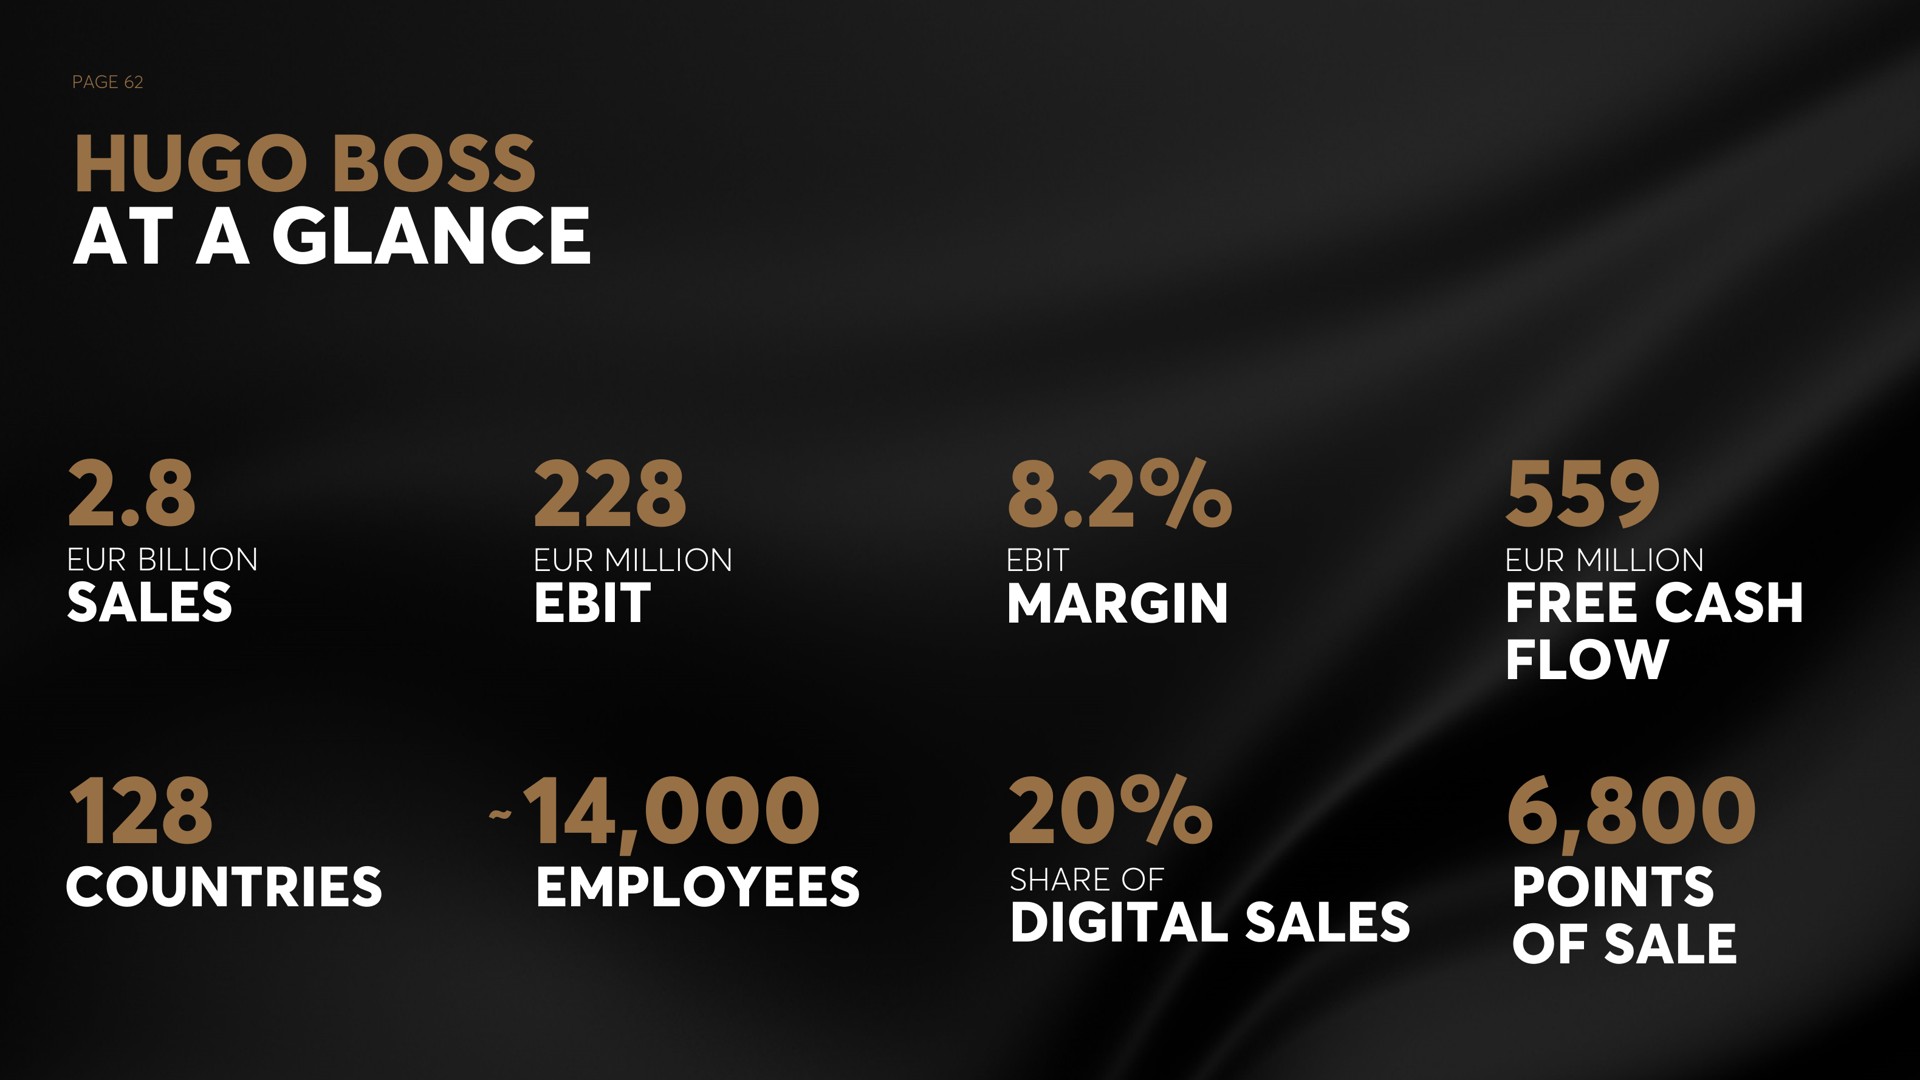 page boss at a glance billion sales million margin million free cash flow countries employees share of digital sales points of sale | Hugo Boss